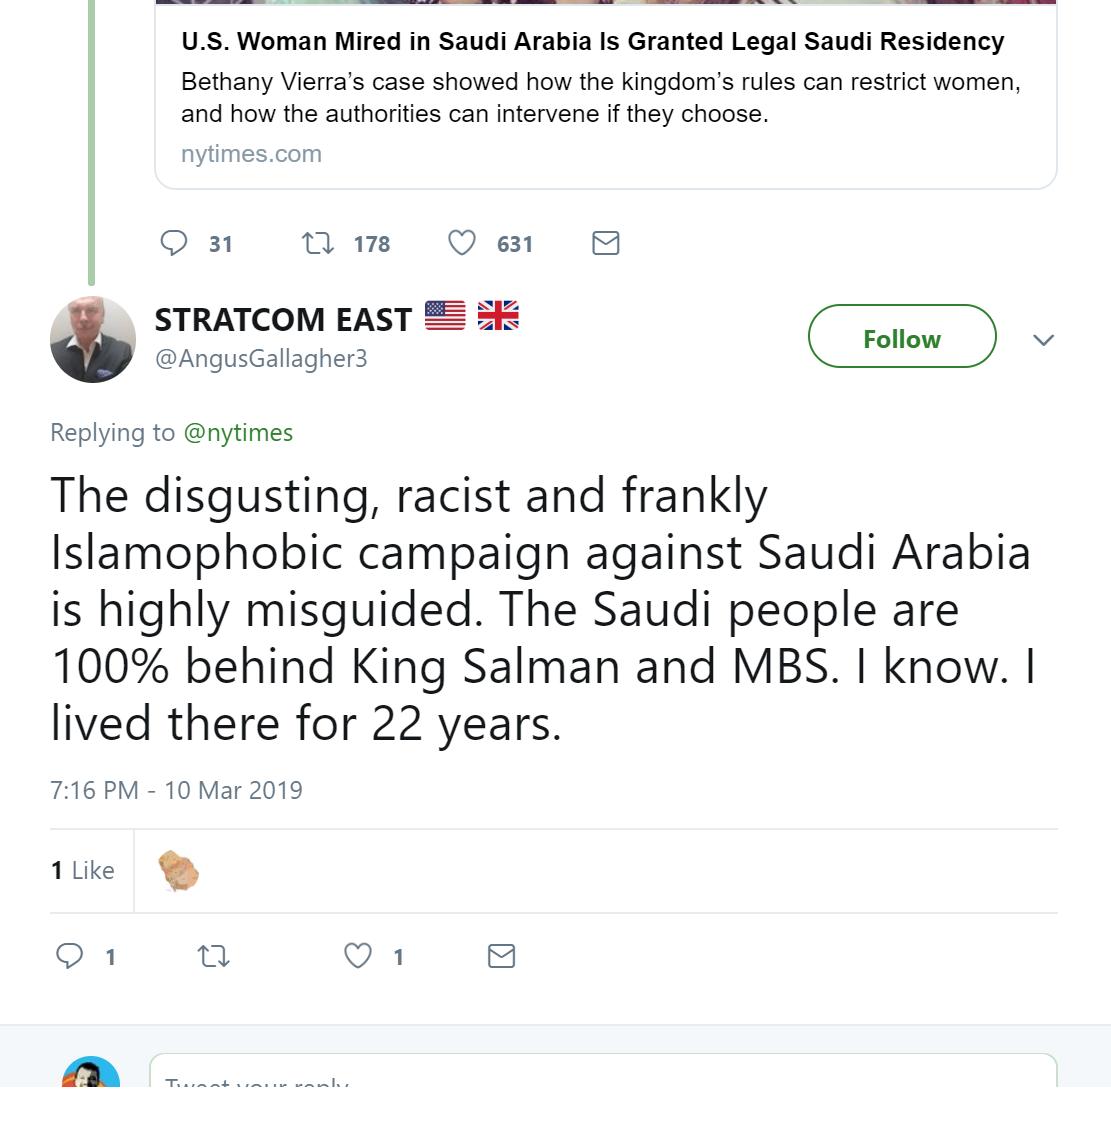 Why this Middle-aged white man with a lilac shirt would have such strong opinions on the region was unclear. However, as he detailed in his bio, he had lived in Saudi for 22 years - so he clearly had some sort of allegiance. Also, as the flags indicate, he loved the US and UK